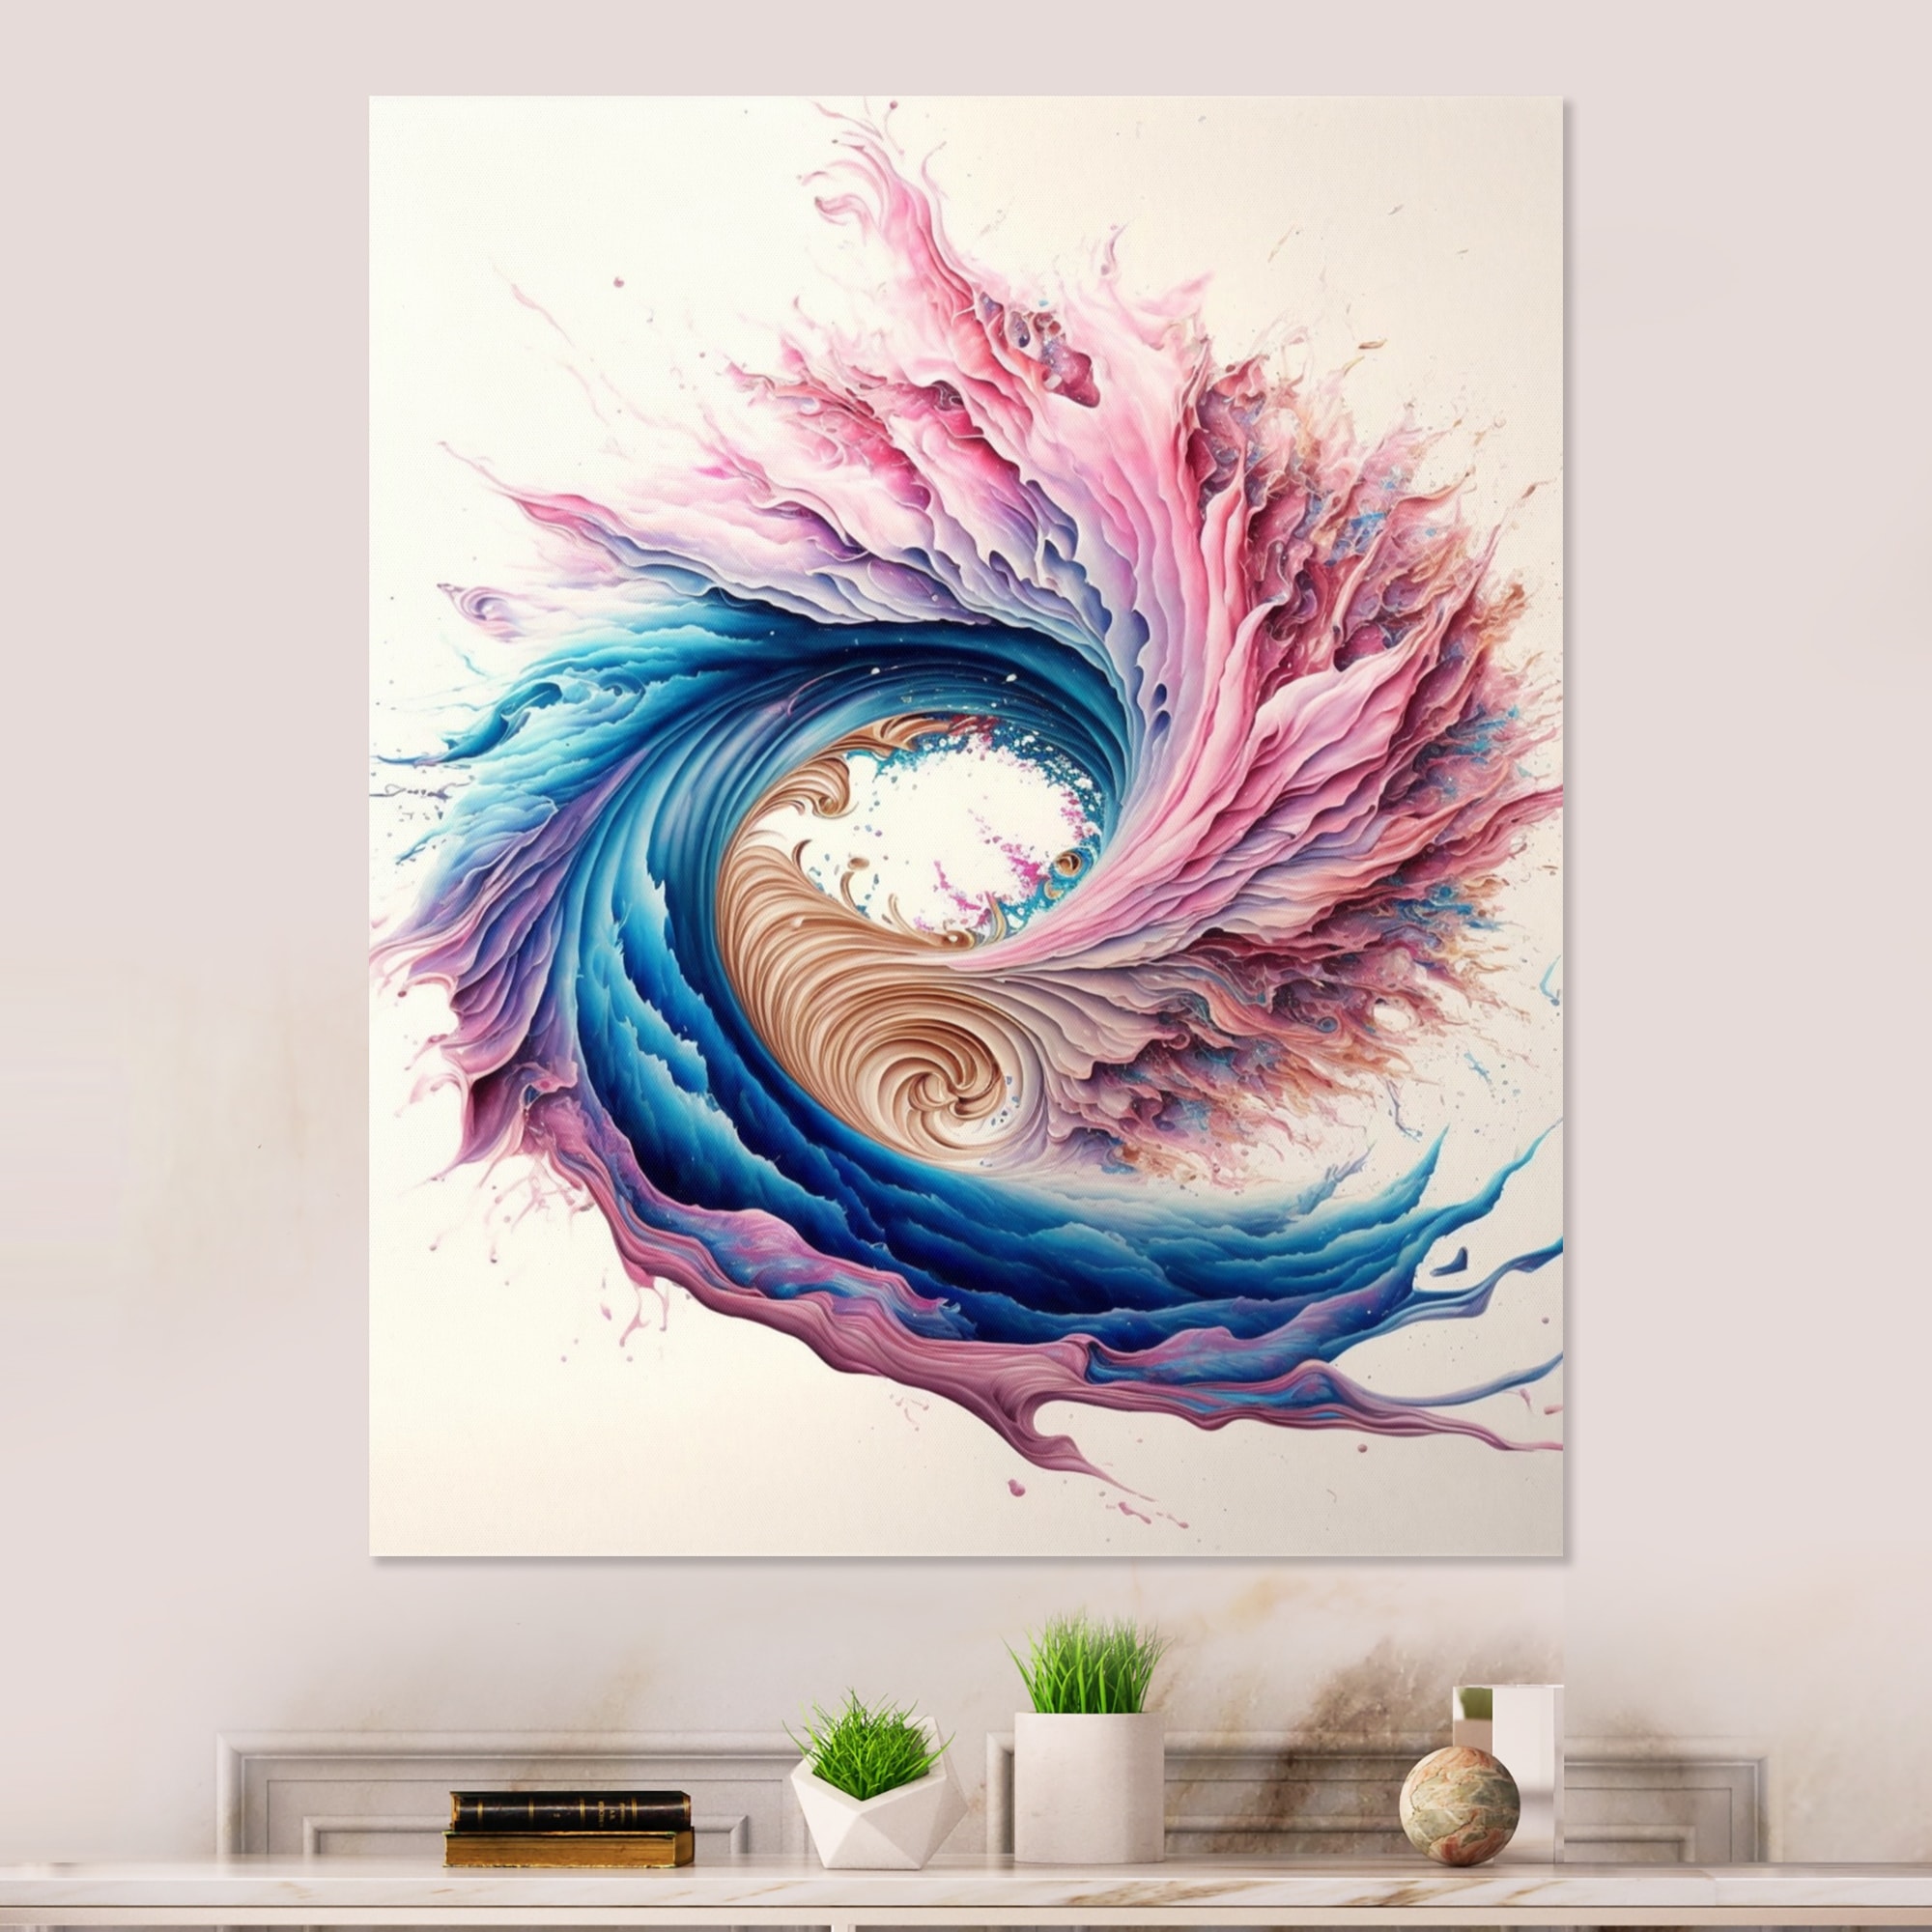 https://ak1.ostkcdn.com/images/products/is/images/direct/22439f9cf79e8f5677ce7f0822d1e096c3a59a41/Designart-%27Multi-Color-Paint-Swirl-IV%27-Modern-Canvas-Wall-Art.jpg